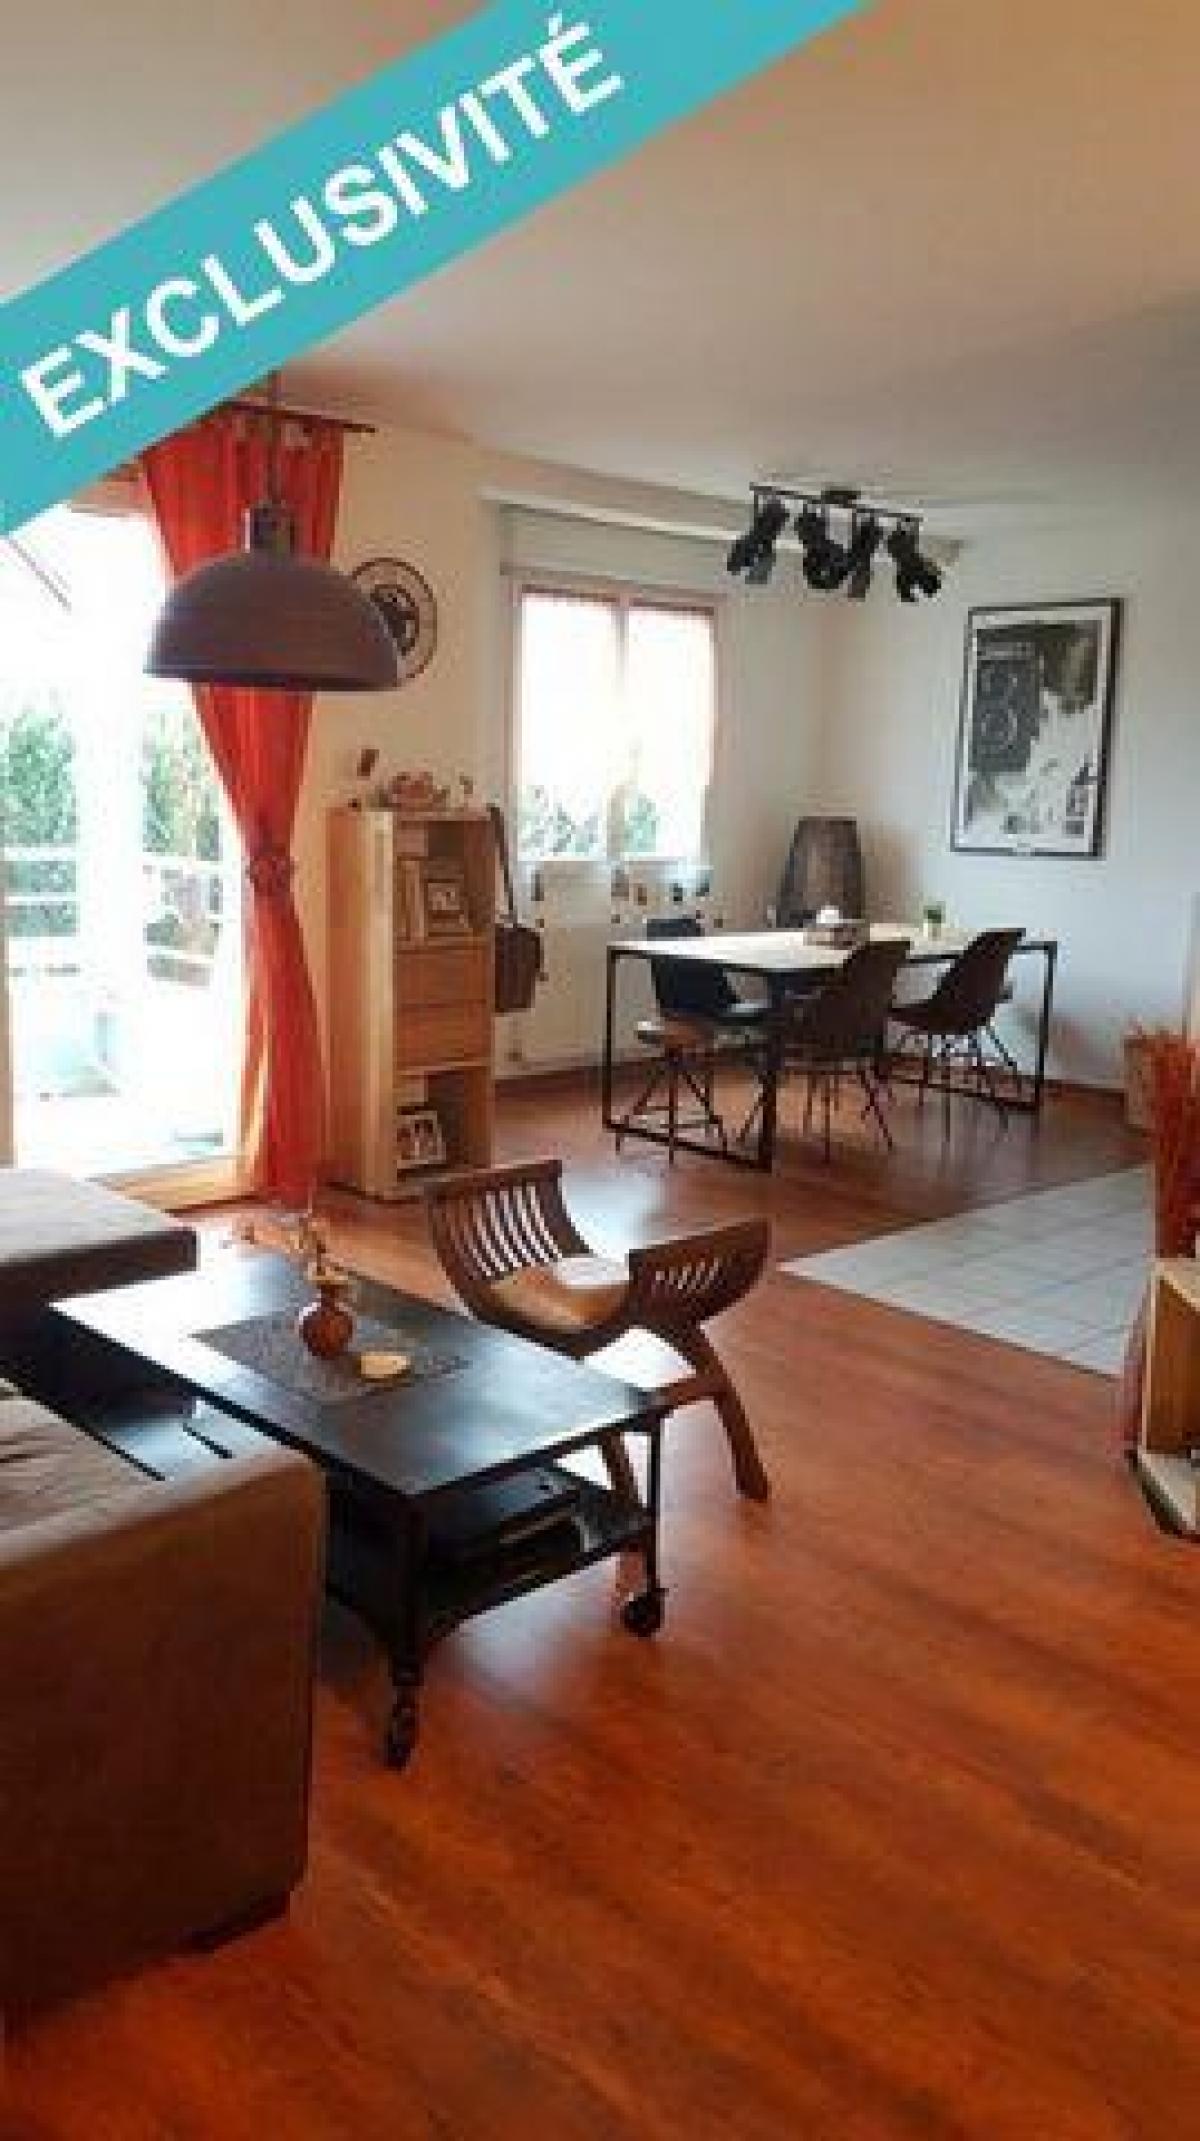 Picture of Apartment For Sale in Ensisheim, Alsace, France